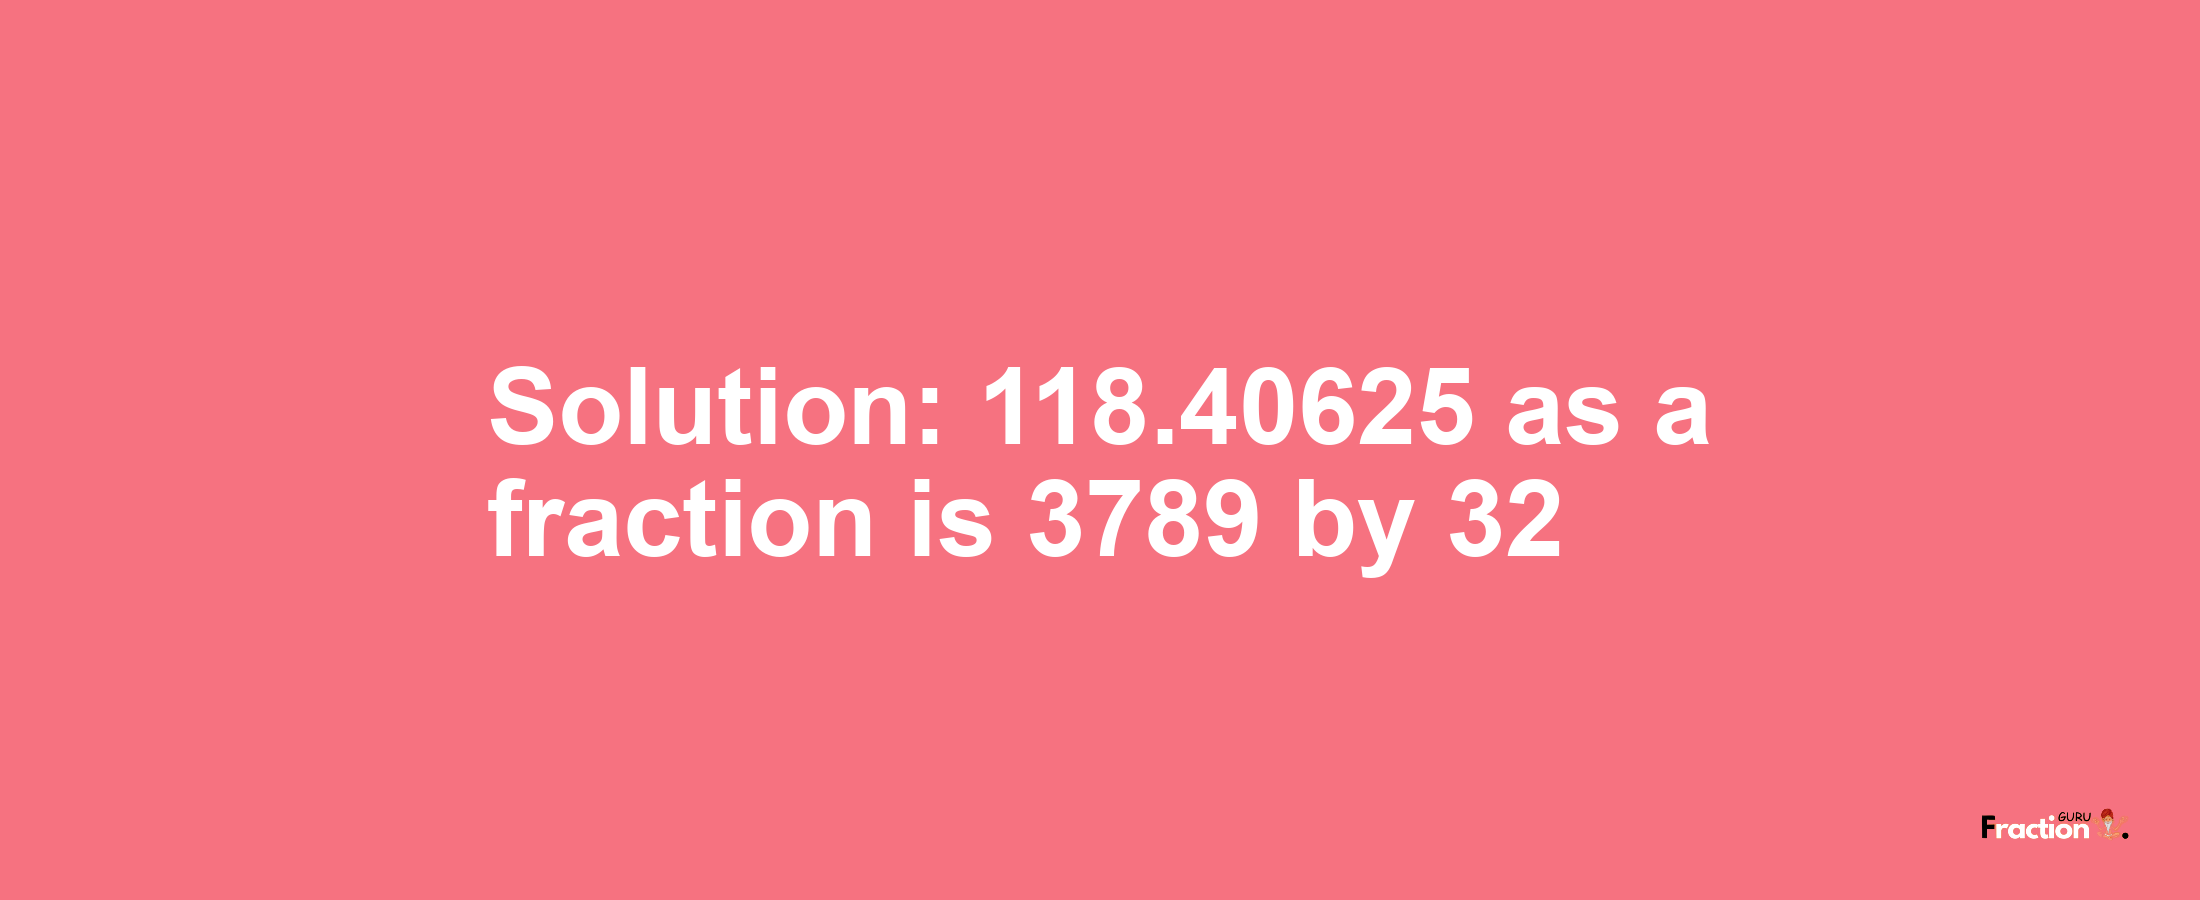 Solution:118.40625 as a fraction is 3789/32